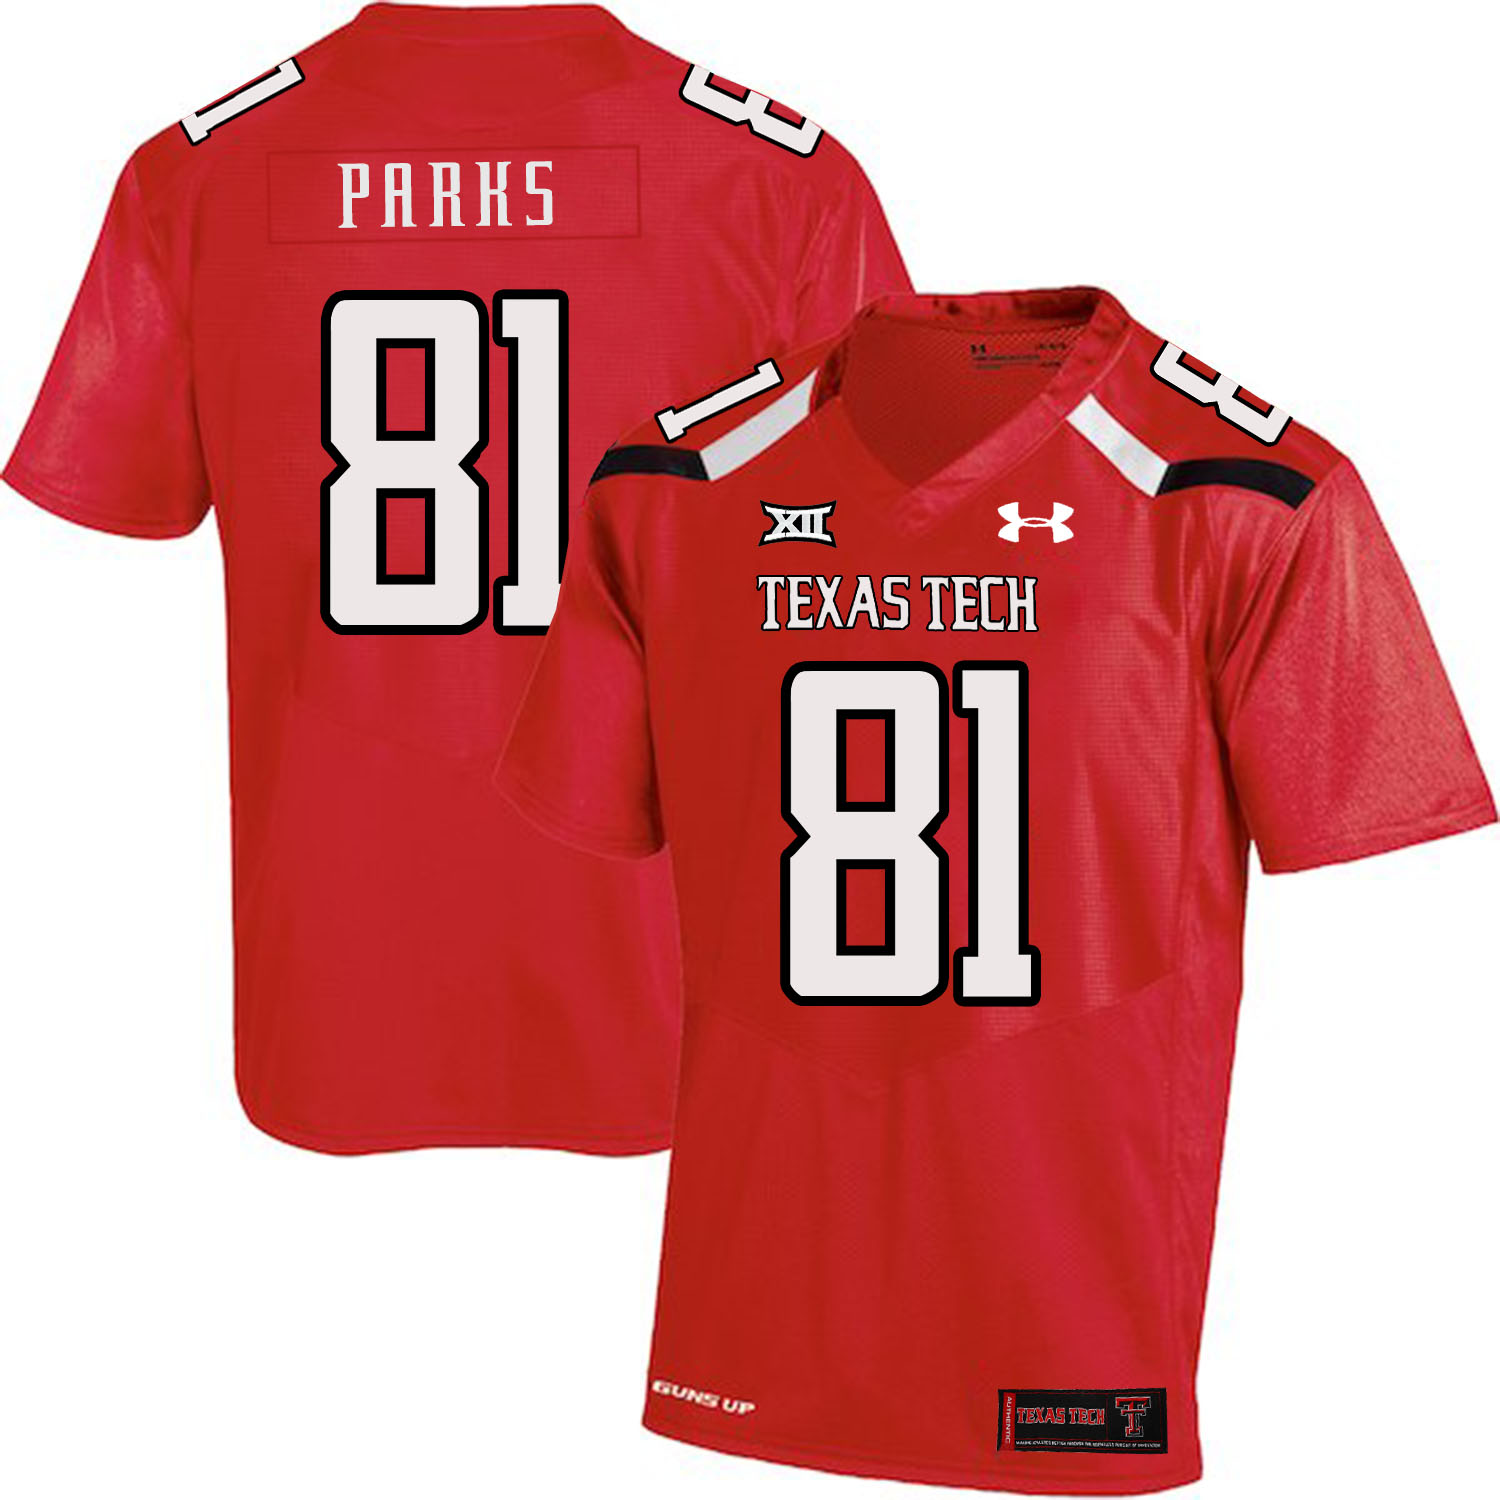 Texas Tech Red Raiders 81 Dave Parks Red College Football Jersey